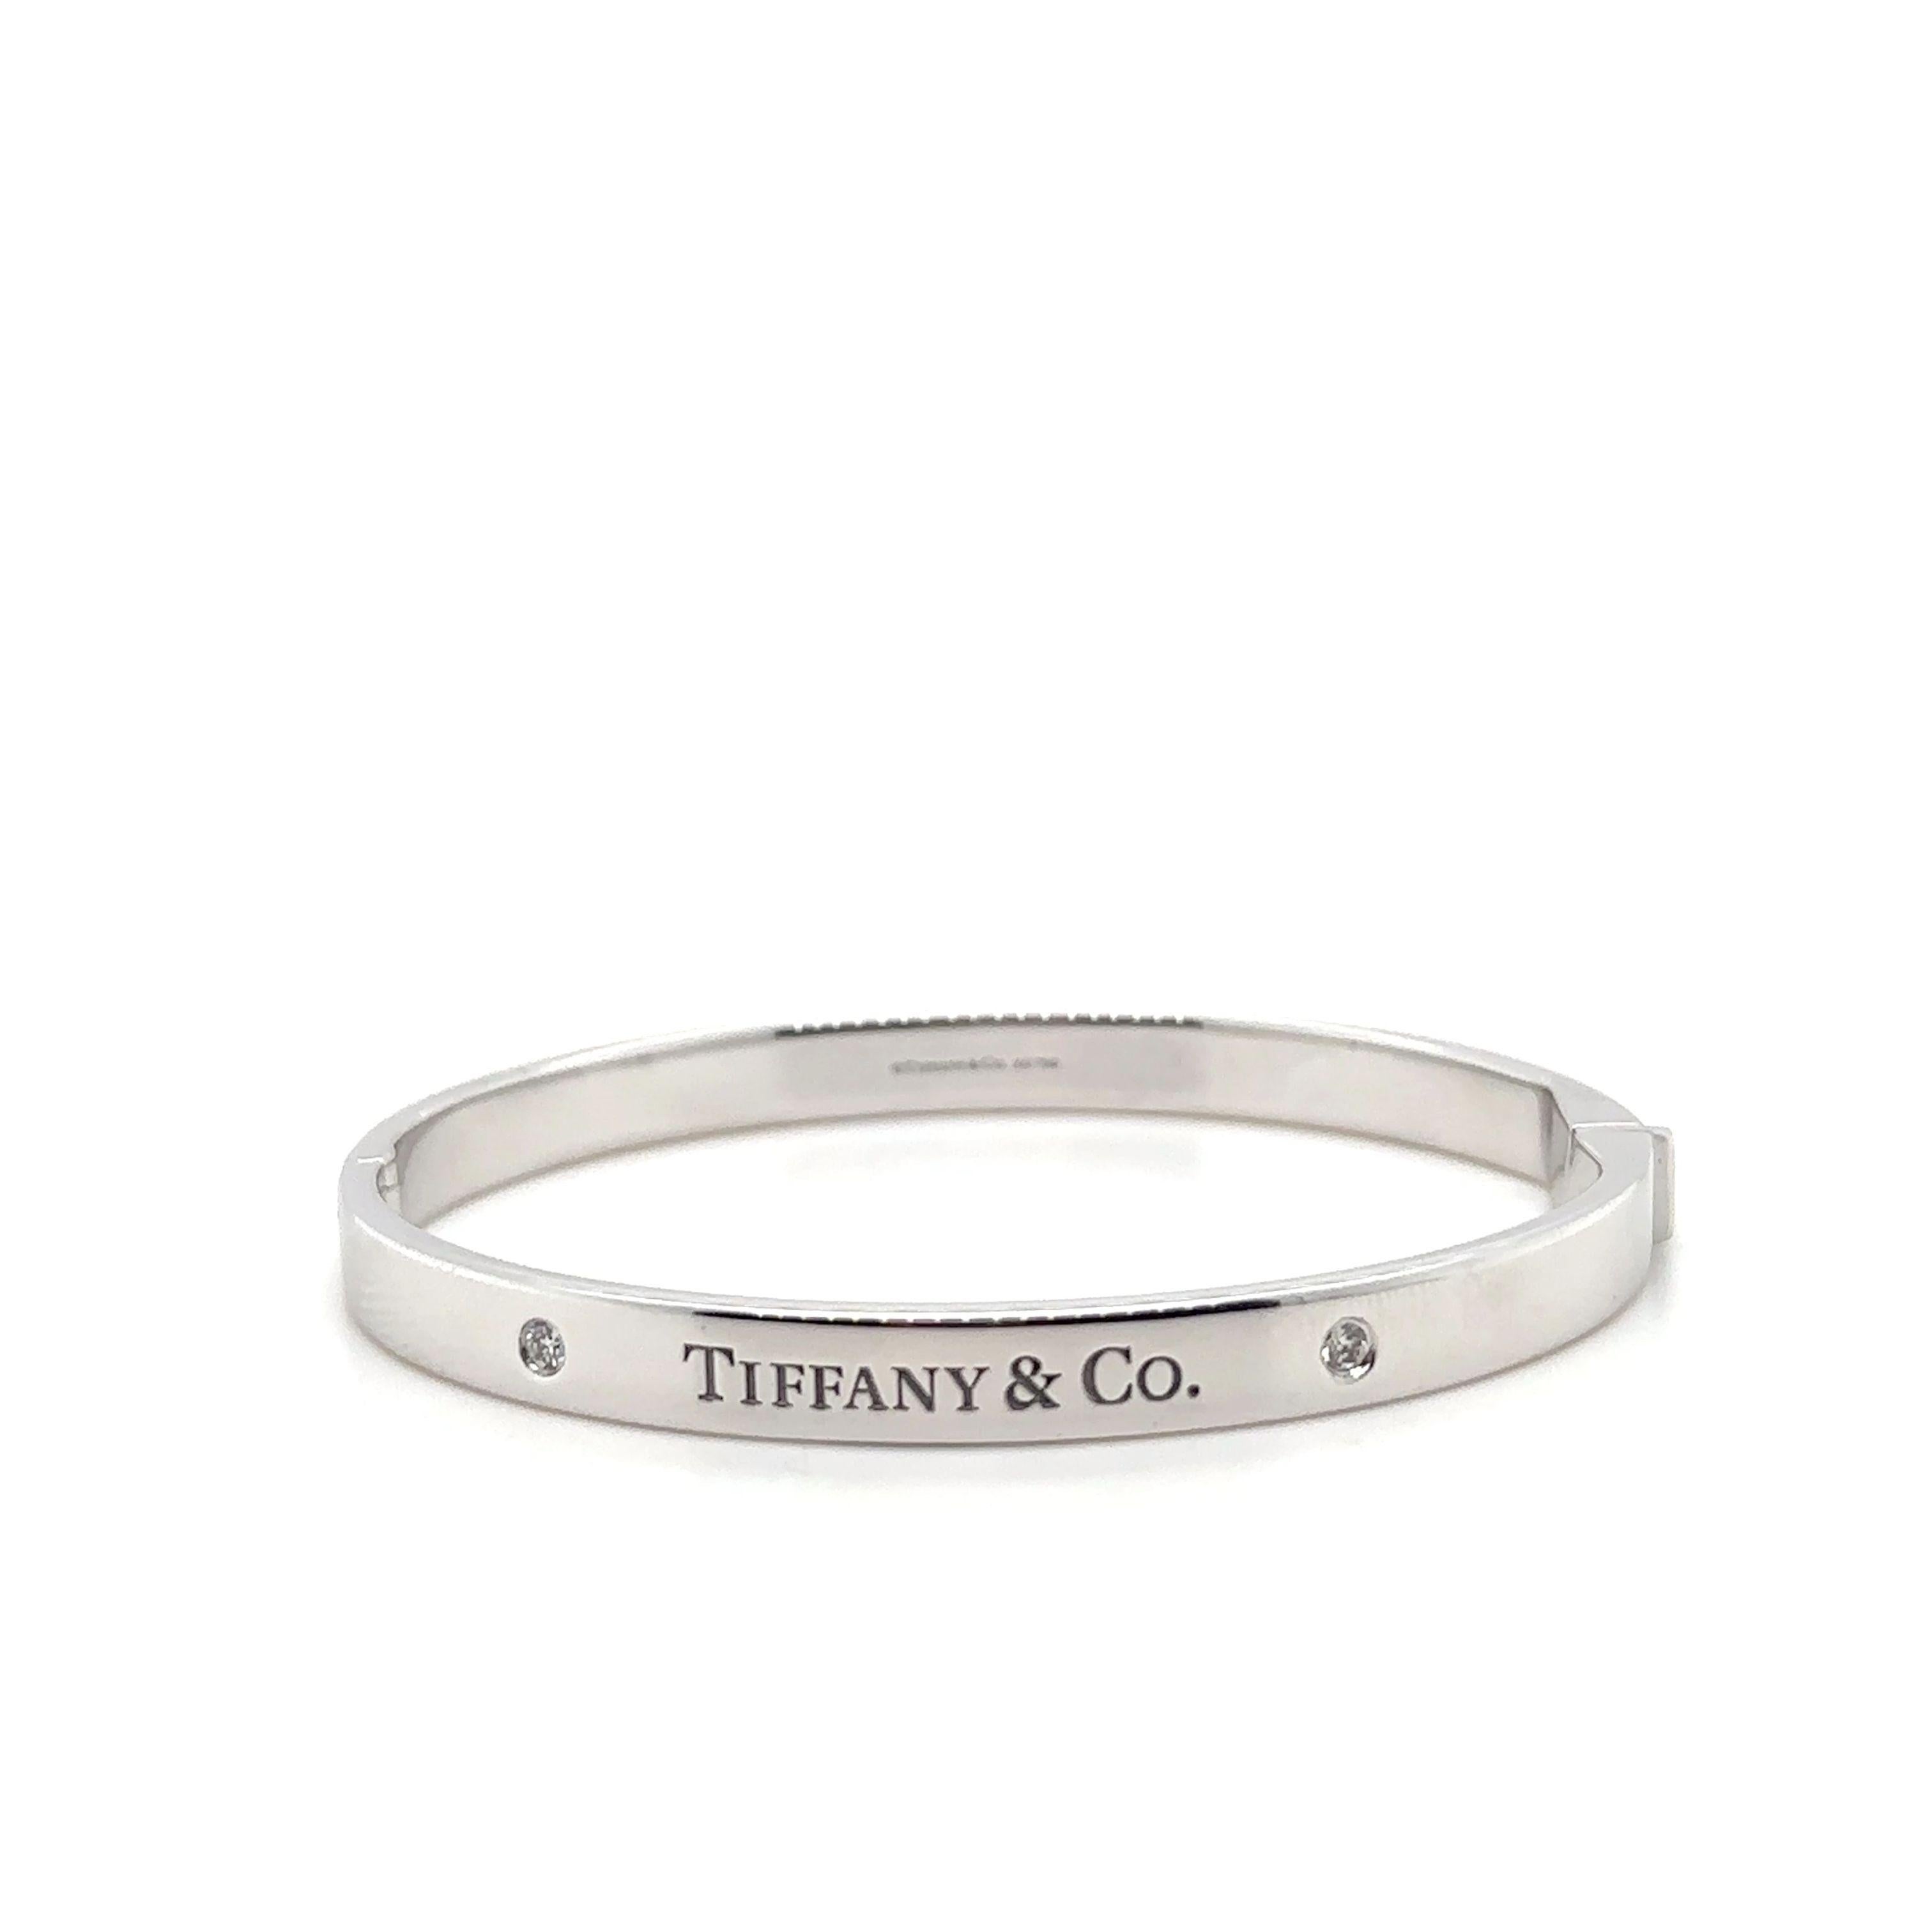  A Tiffany & Co. Diamond bangle, made of 18ct White Gold, and weighing 38.7 gm.

Stamped: Tiffany & Co. AU 750.

The bangle is set with 2 round, brilliant cut Diamonds, colour D-E and clarity VVS with a total weight of 0.10 ct.

Metal: 18ct White